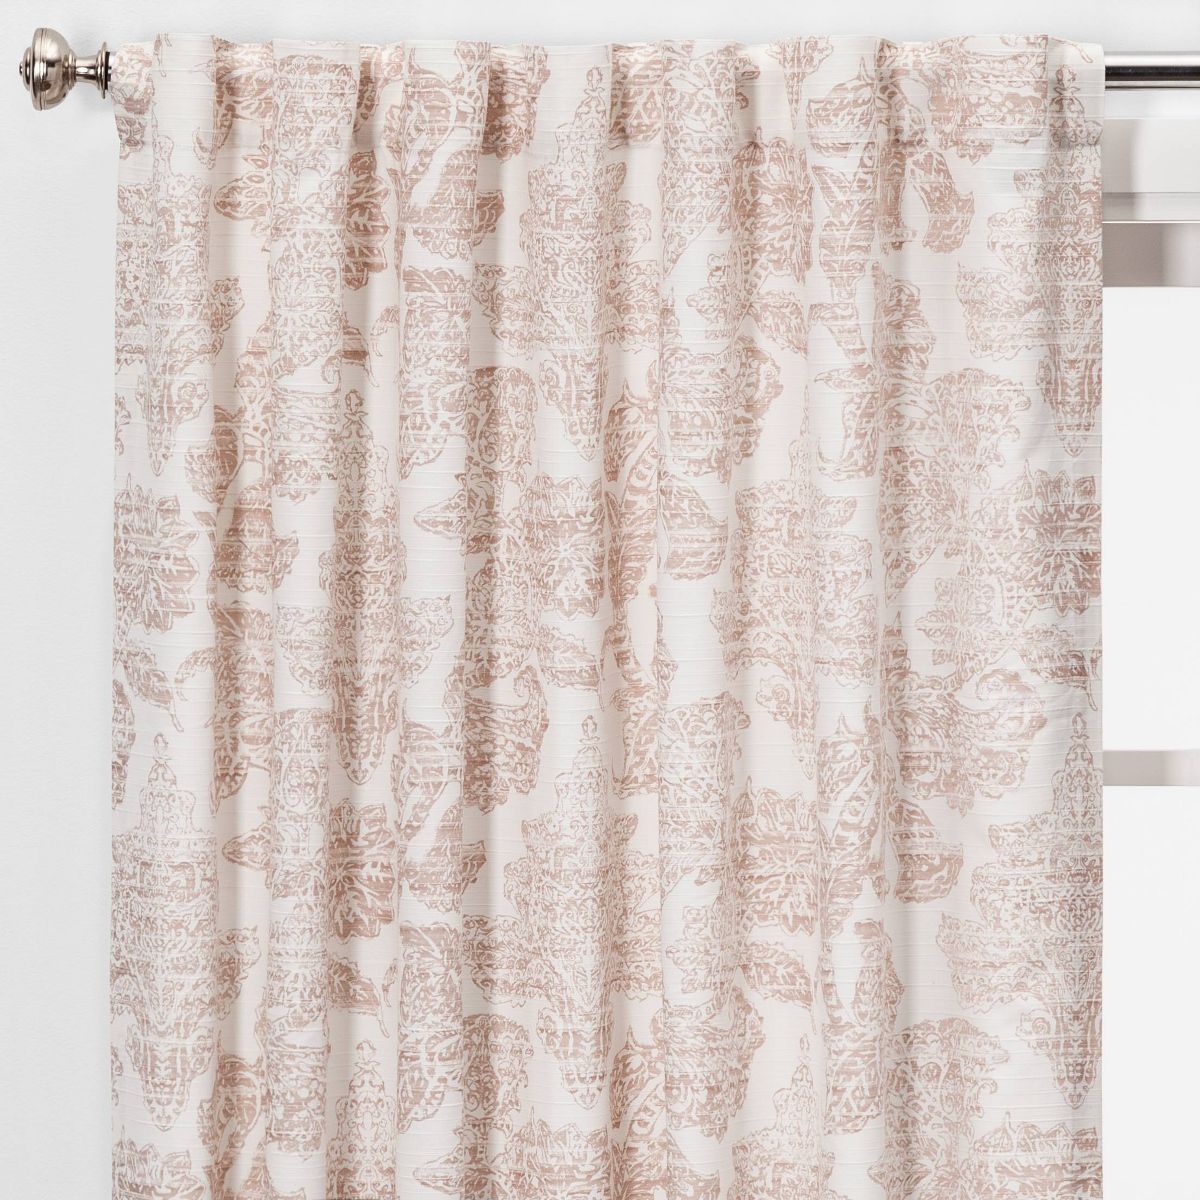 1pc Light Filtering Charade Floral Window Curtain Panel - Threshold™ | Target